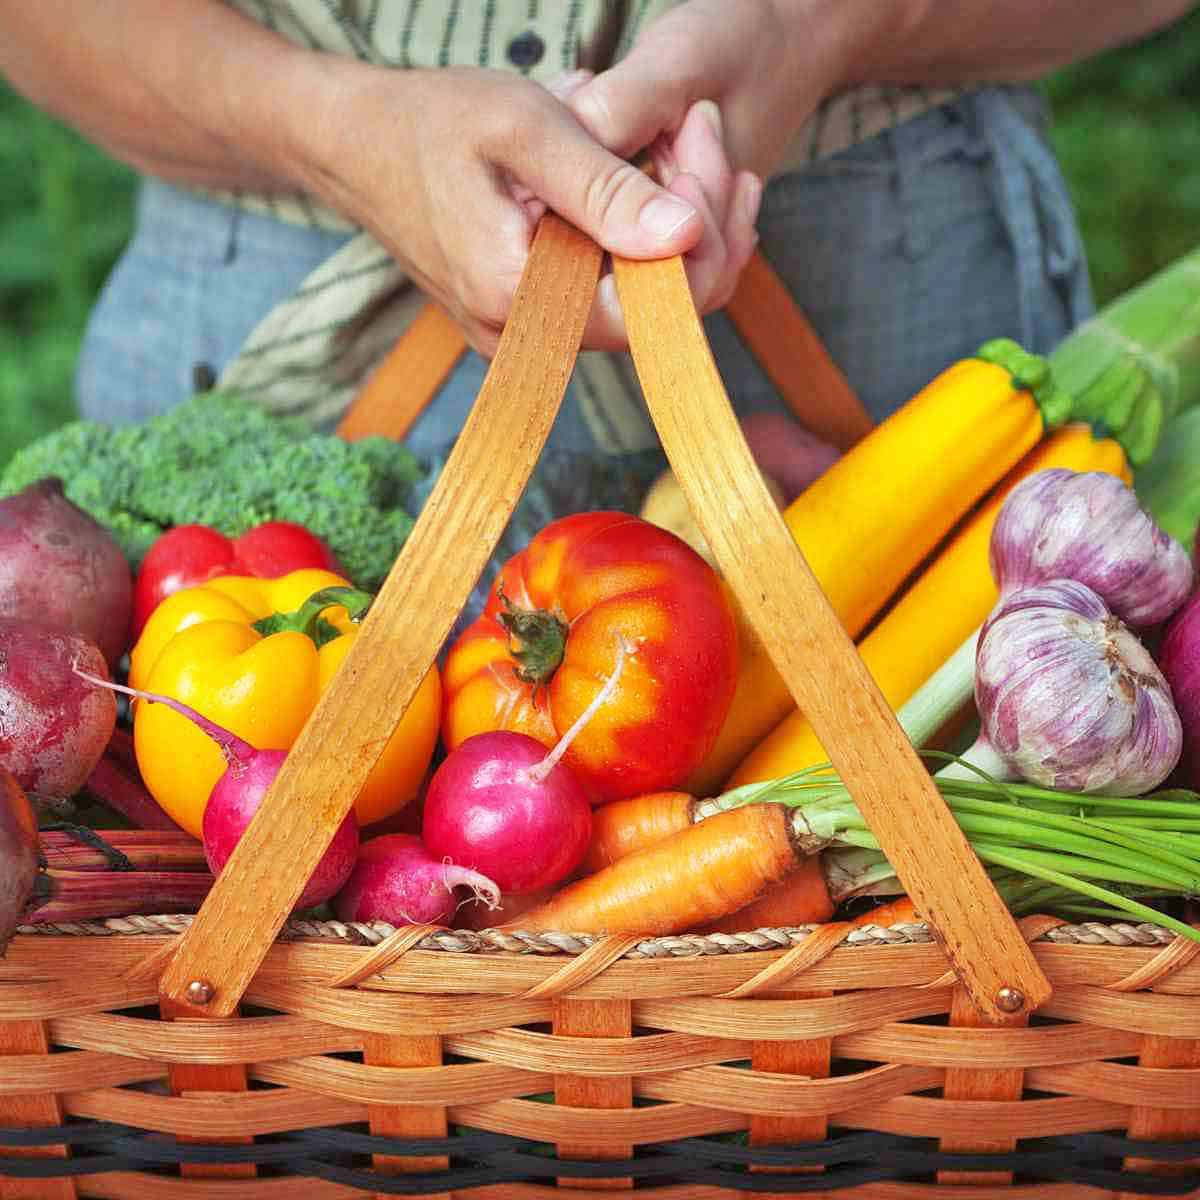 A person holding a large garden basket filled with radishes, garlic, carrots and squash.